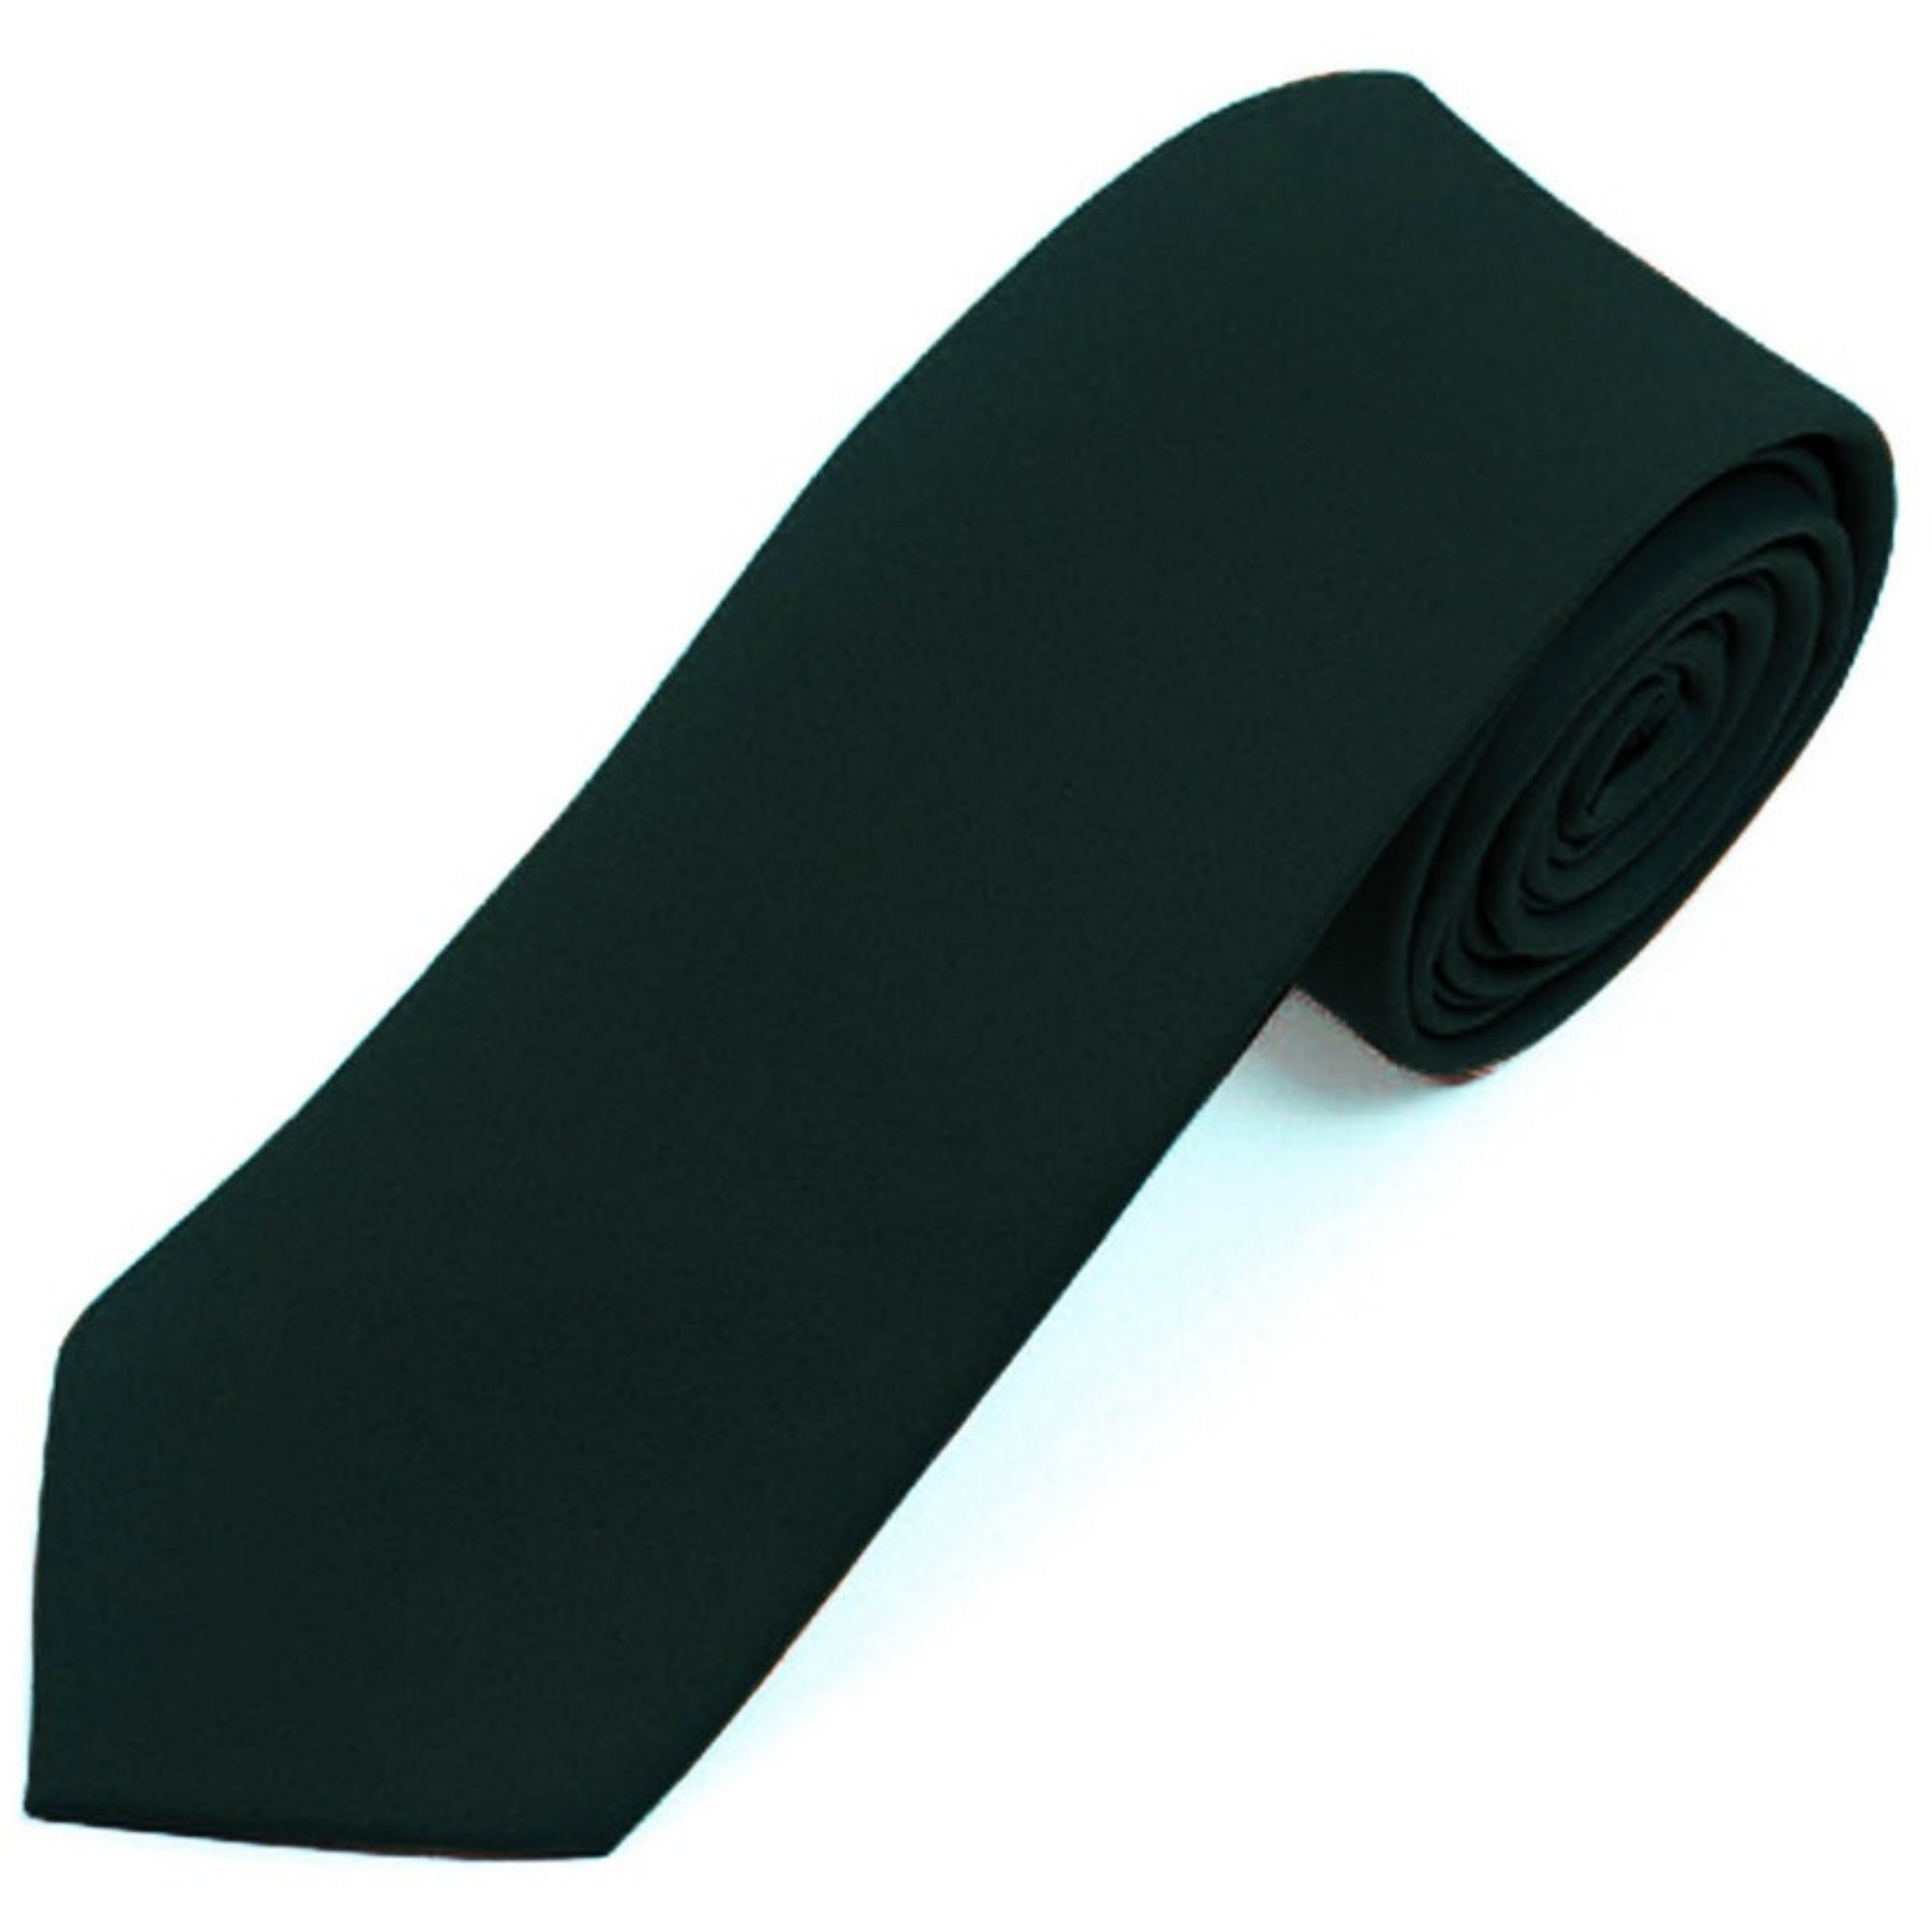 Men's Solid Color 2 Inch Wide And 57 Inch Long Slim Neckties Neck Tie TheDapperTie Hunter Green 57" long and 2" wide 